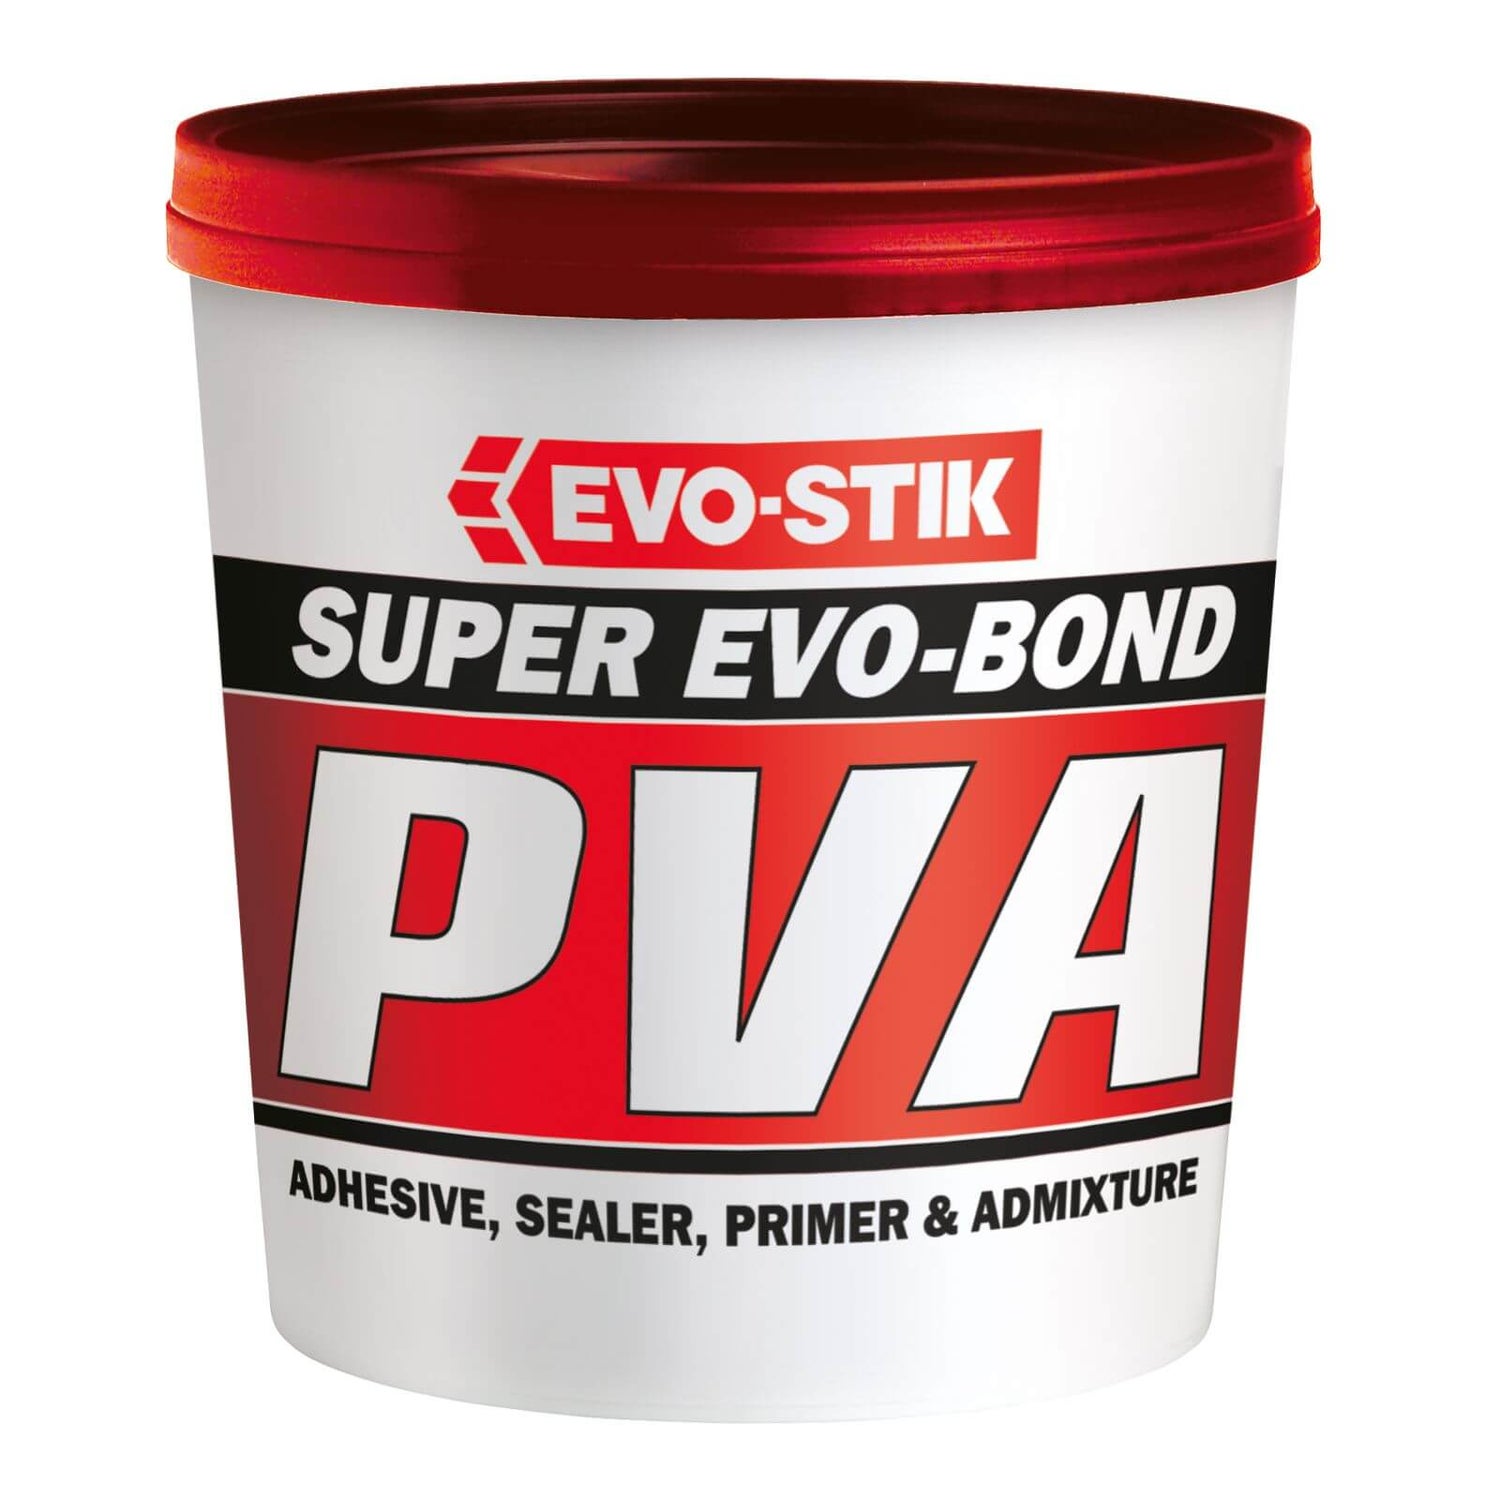 Your complete guide to PVA glue - Gathered